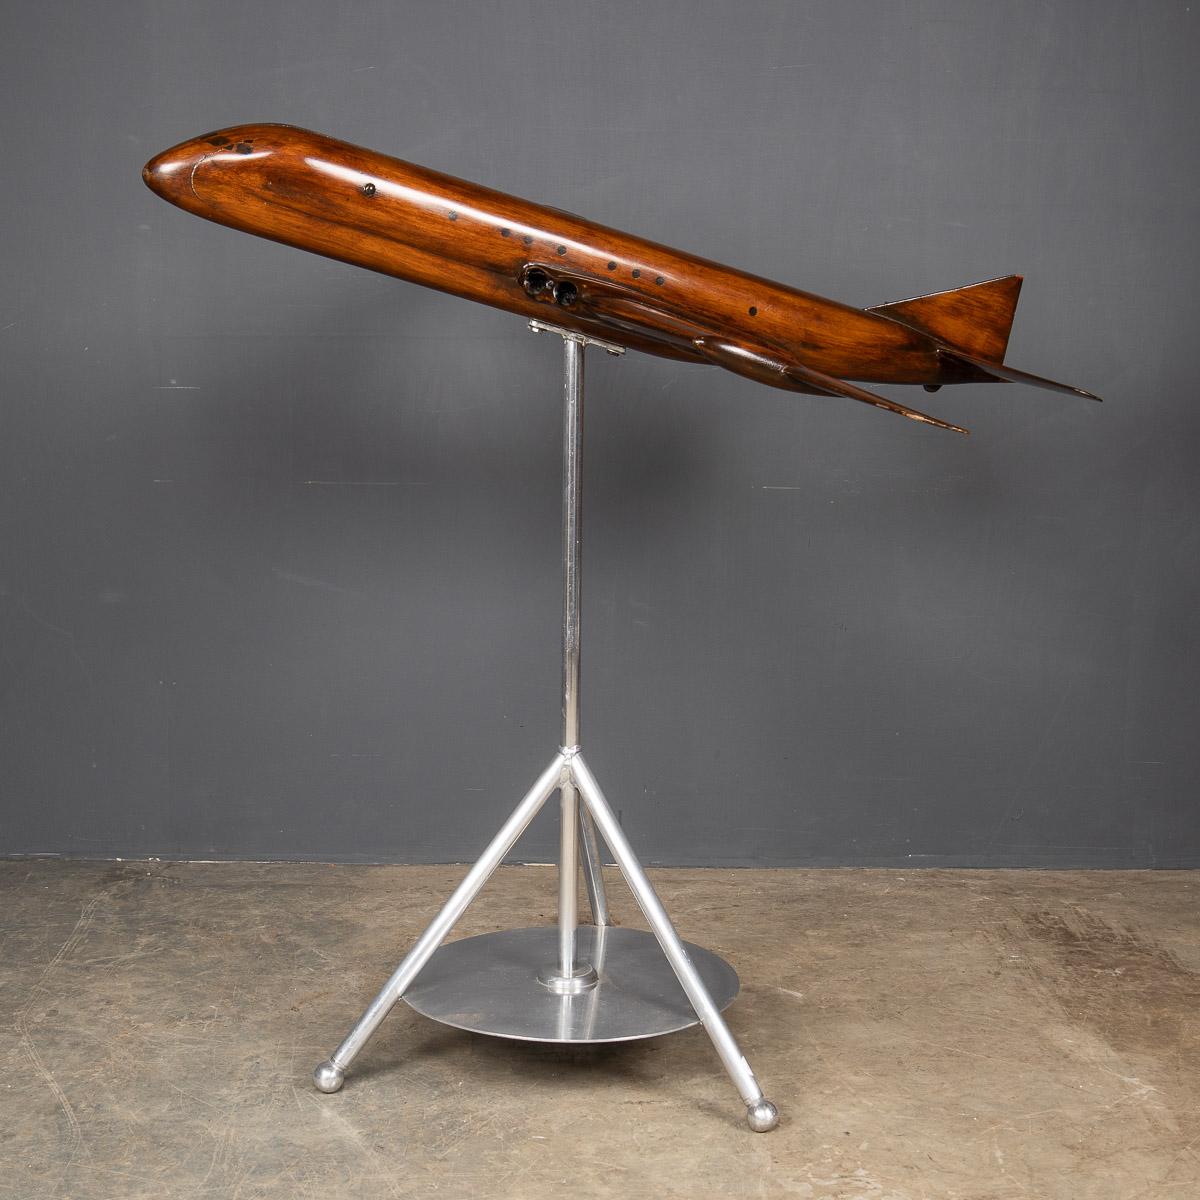 20thC Mahogany Model Of A Hawker Siddeley Nimrod Airplane c.1960 In Good Condition For Sale In Royal Tunbridge Wells, Kent